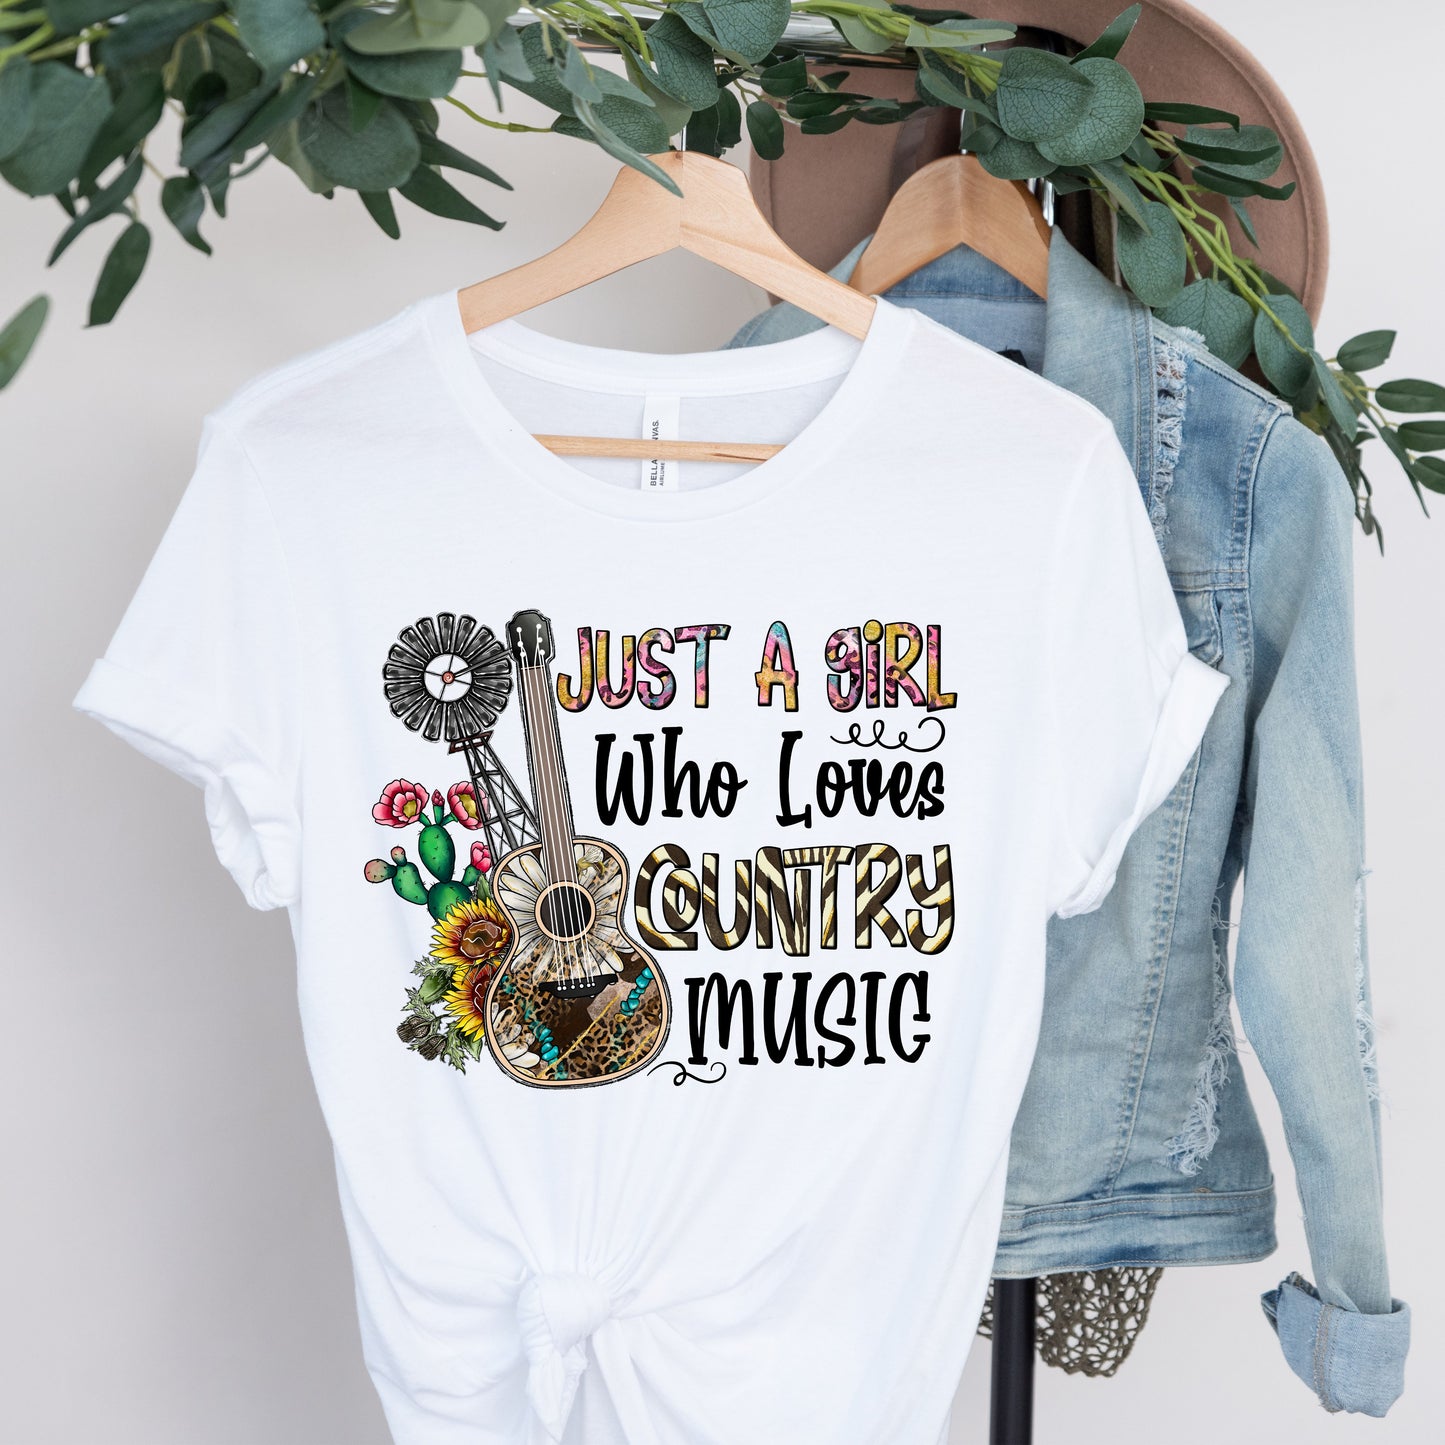 Just a Girl Who Loves Country Music Short Sleeve T-Shirt